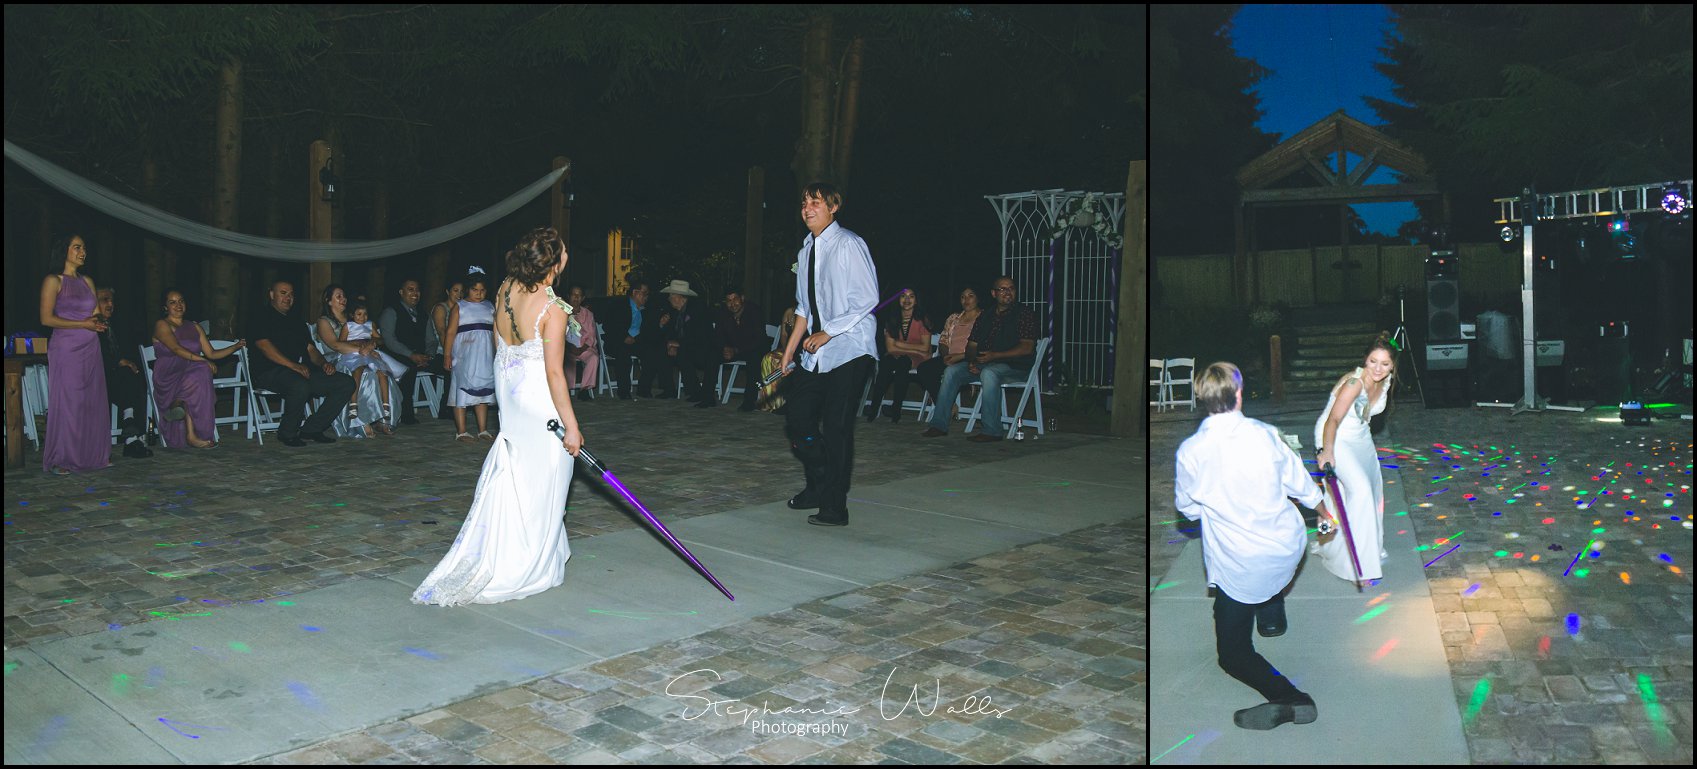 Walker Wedding002 1 Woodland Meadows   Lightsabers and Wands With Nataly and Marty